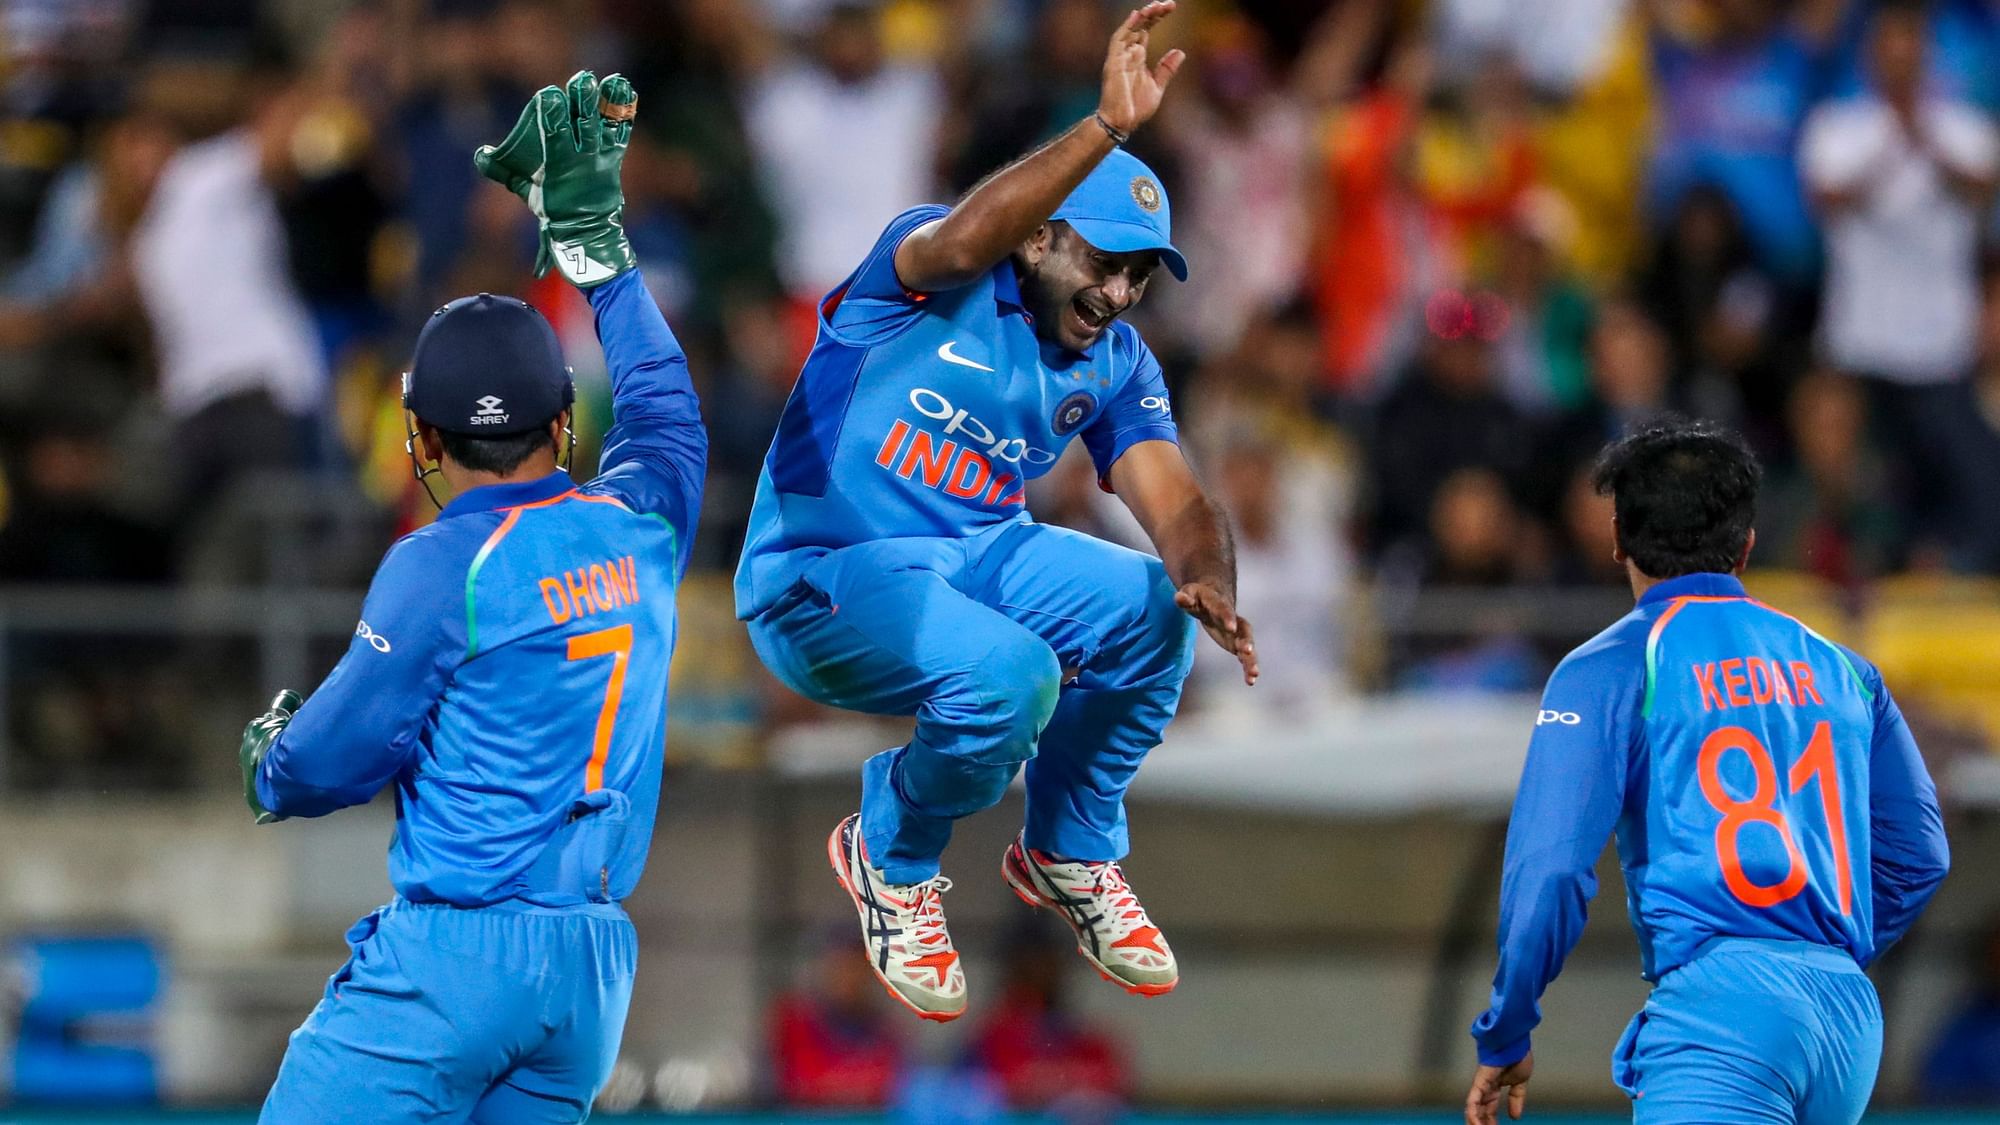 Indian players celebrate after MS Dhoni effected a run-out to dismiss James Neesham during the fifth ODI against New Zealand at Wellington.